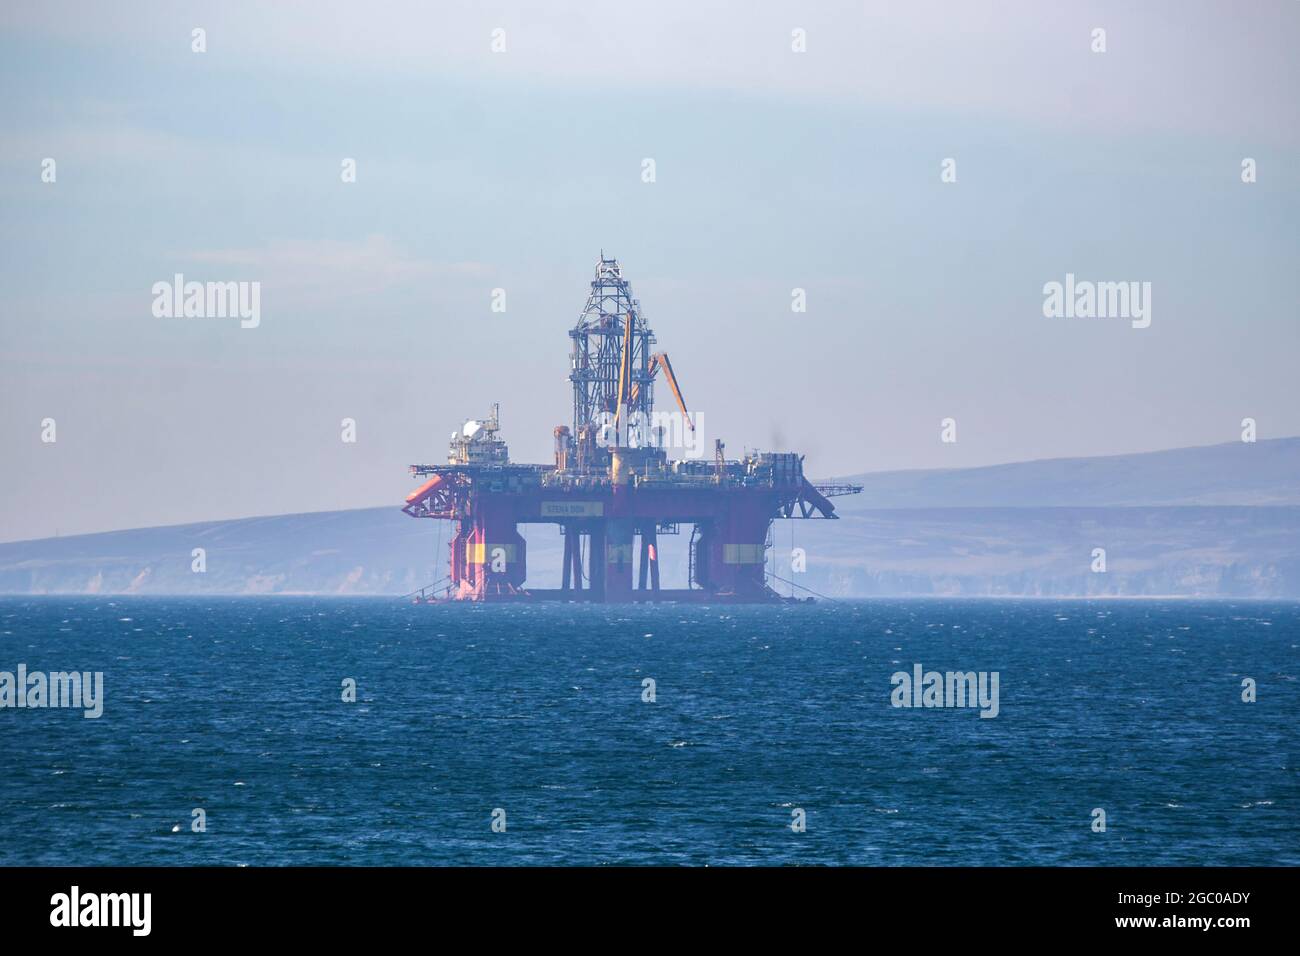 An oil rig in the Orkneys, Scotland, UK Stock Photo